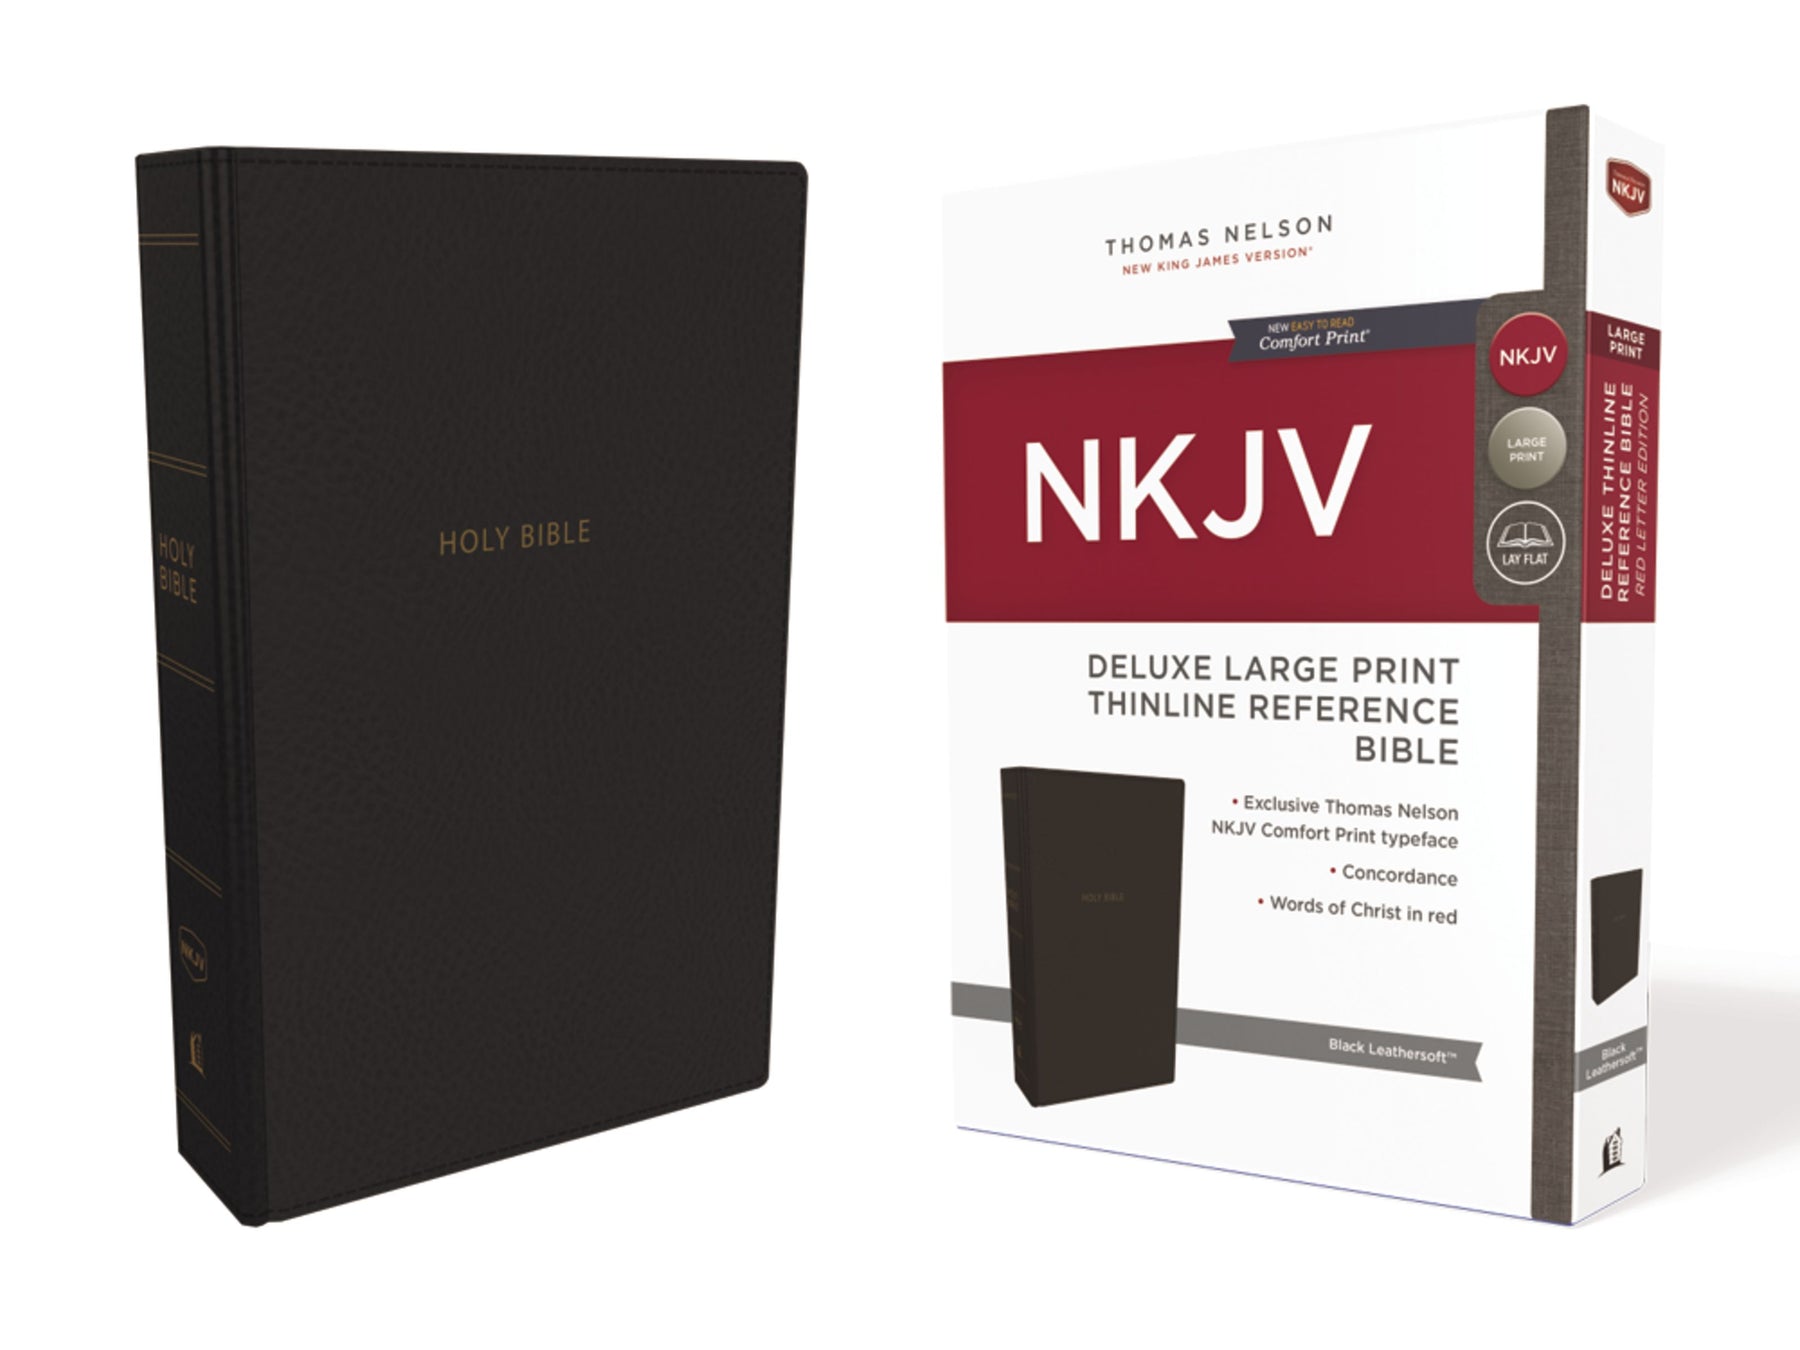 NKJV Deluxe Large Print Thinline Reference Bible-Black Leathersoft